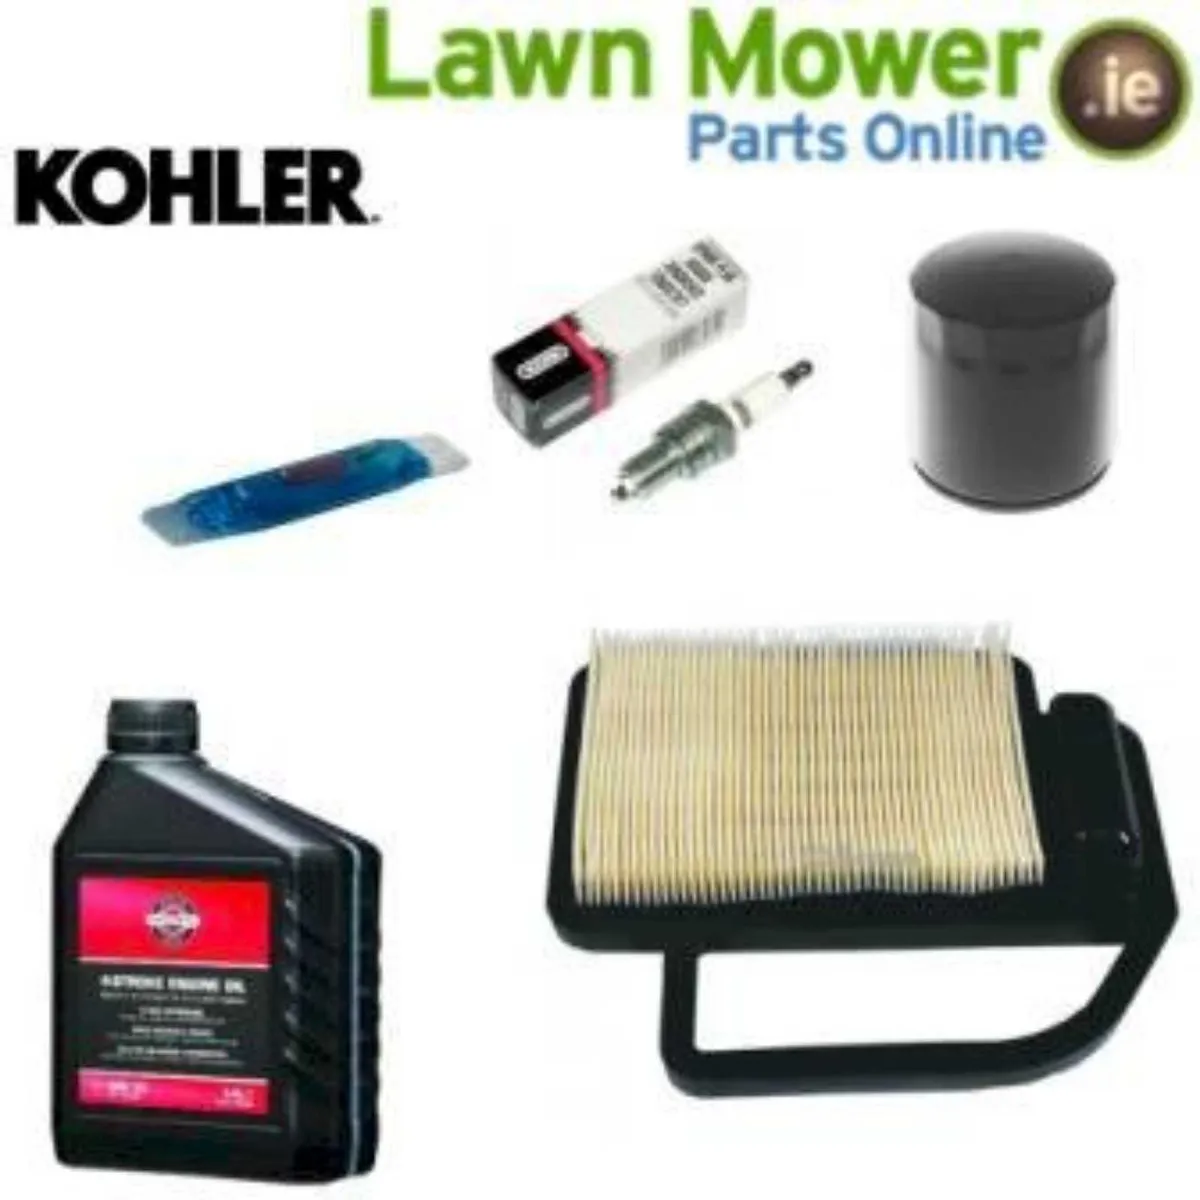 Lawnmower Service Kits - From €12.99